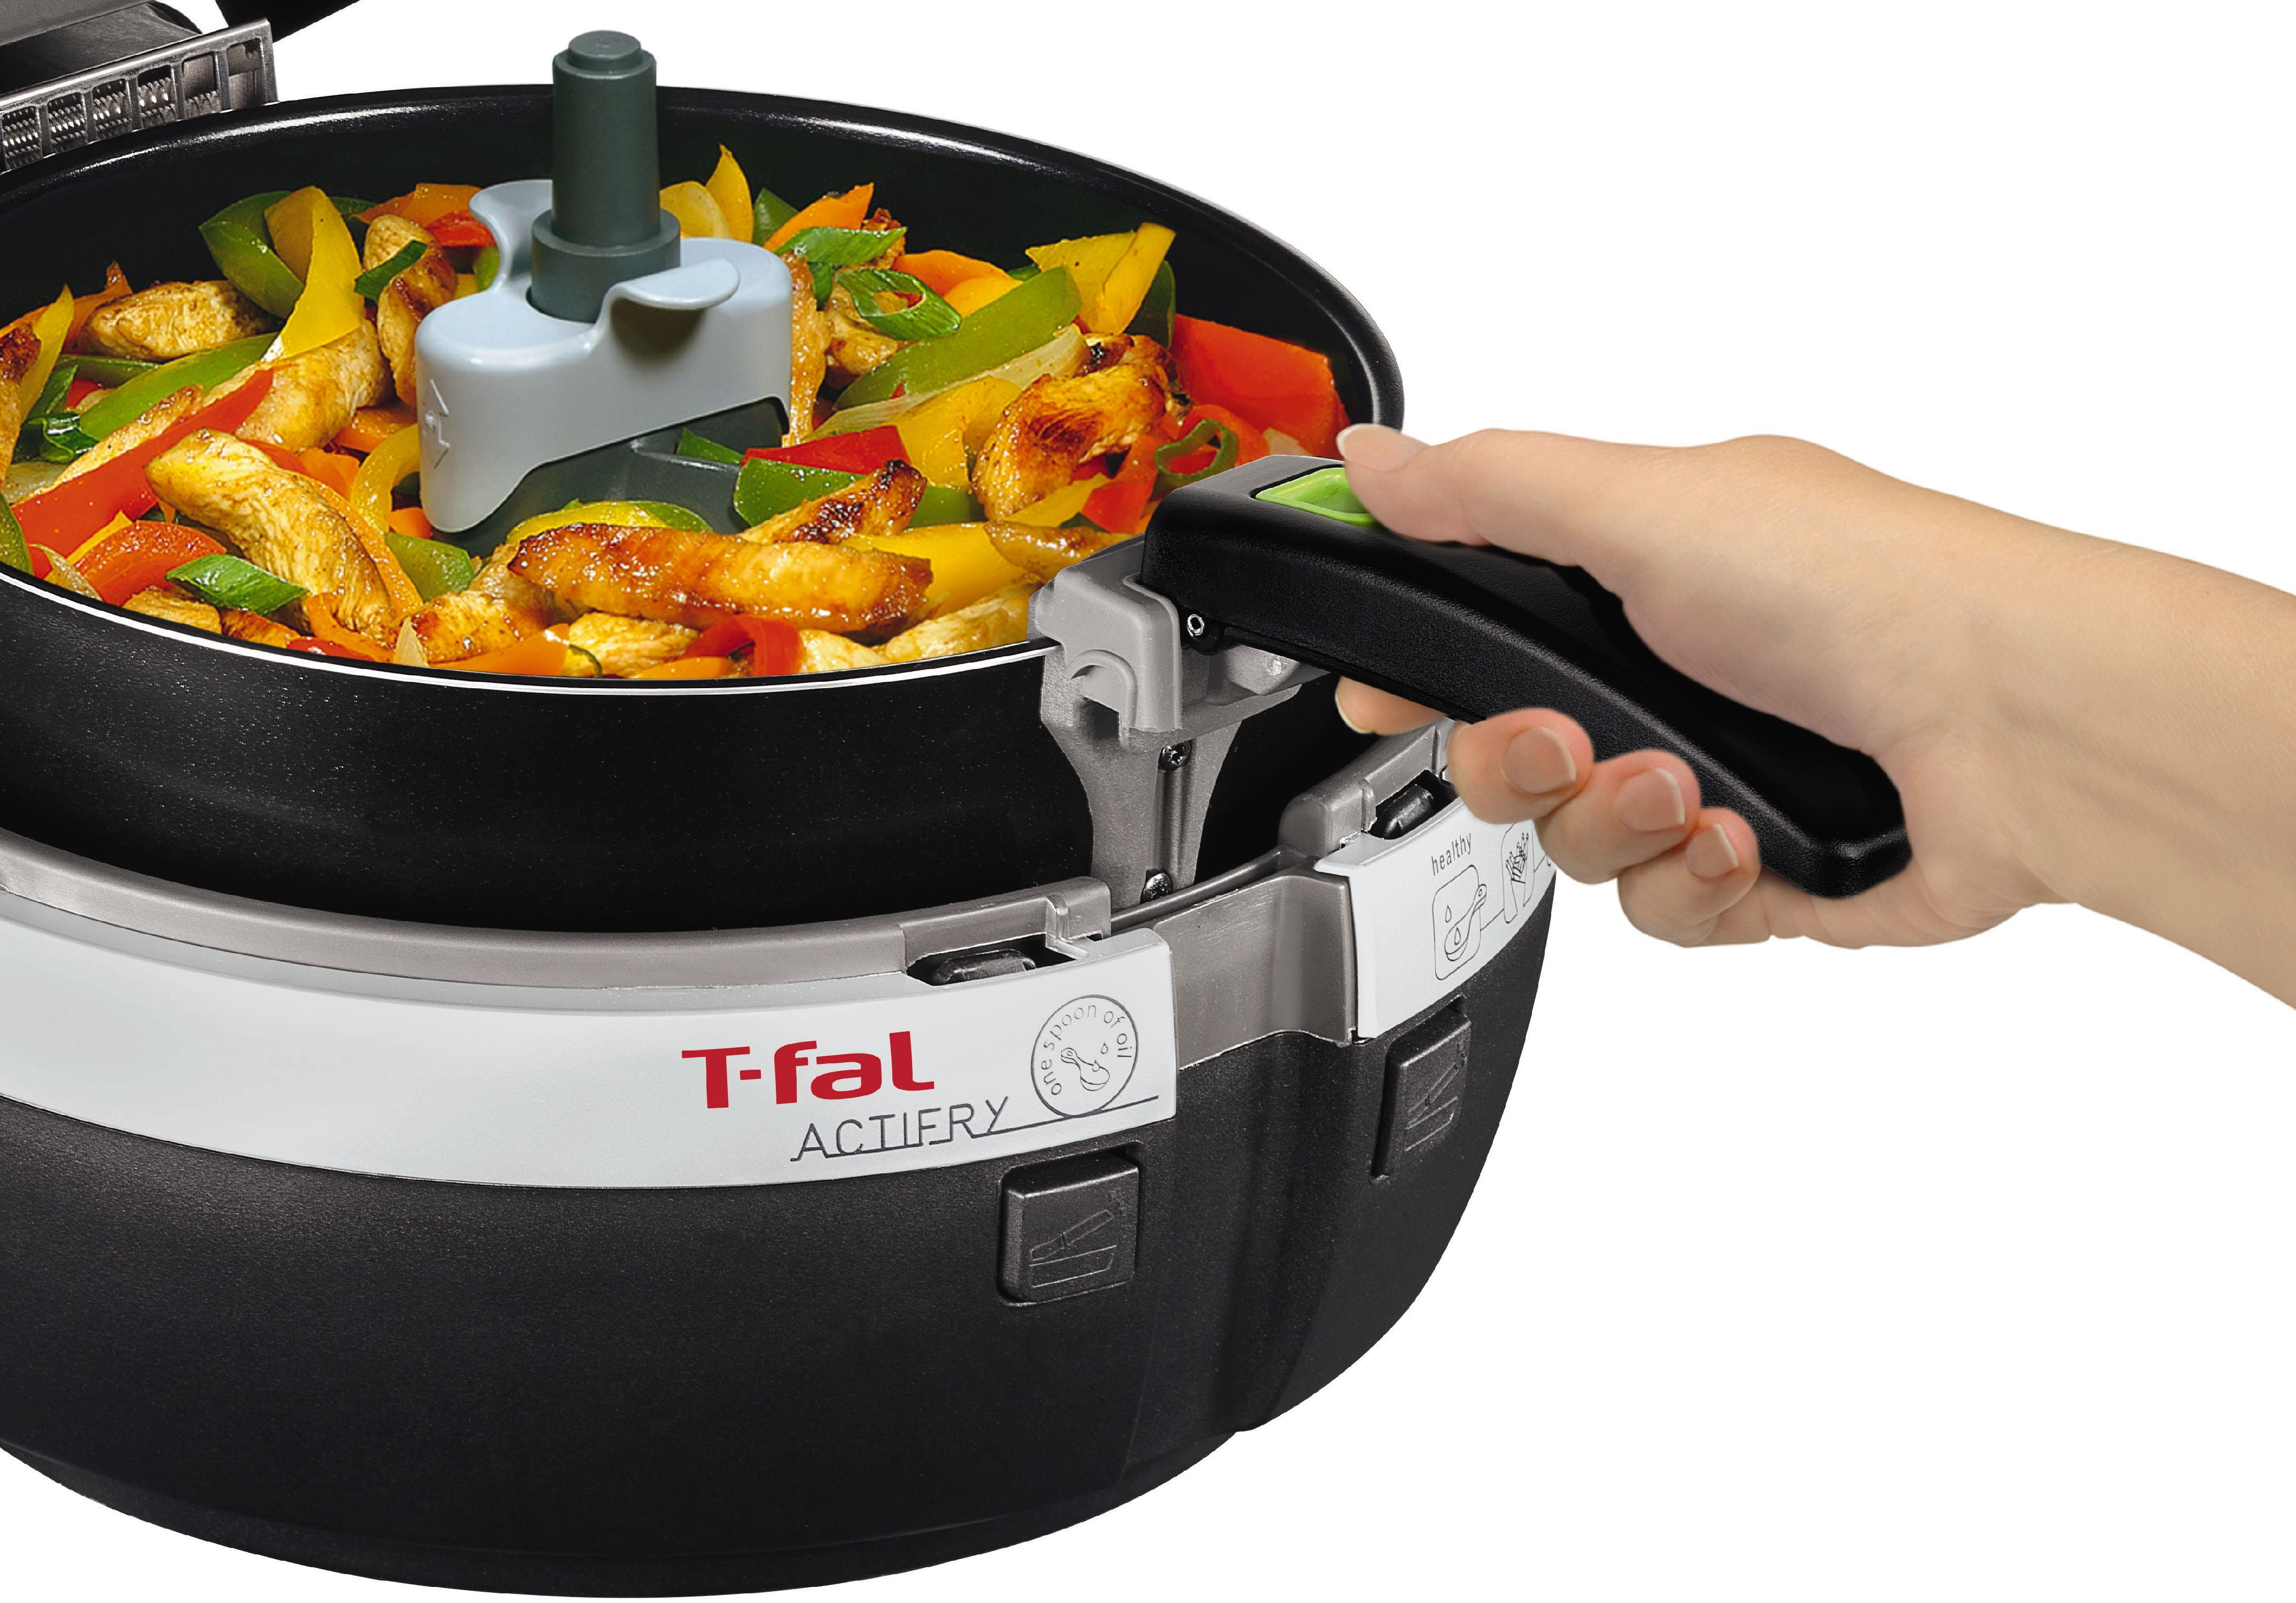 Tefal FZ710840 Actifry 1kg Low Fat Fryer 1400W, Ulster Stores